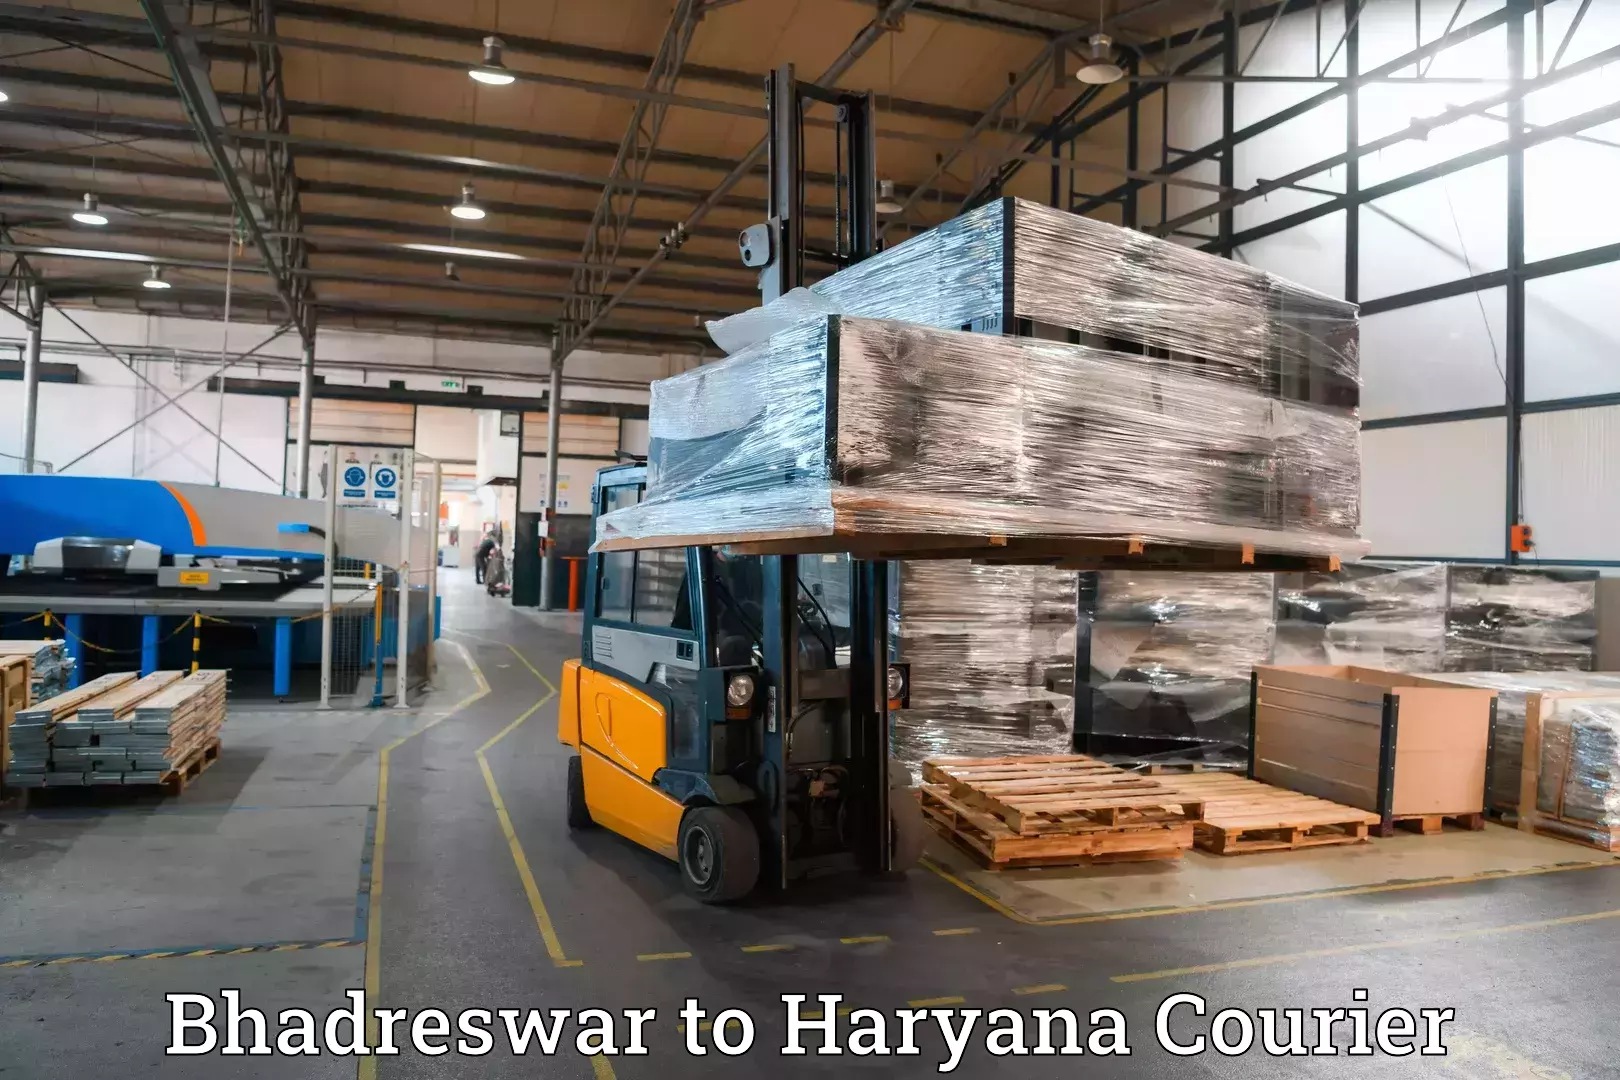 Baggage relocation service Bhadreswar to Bhuna